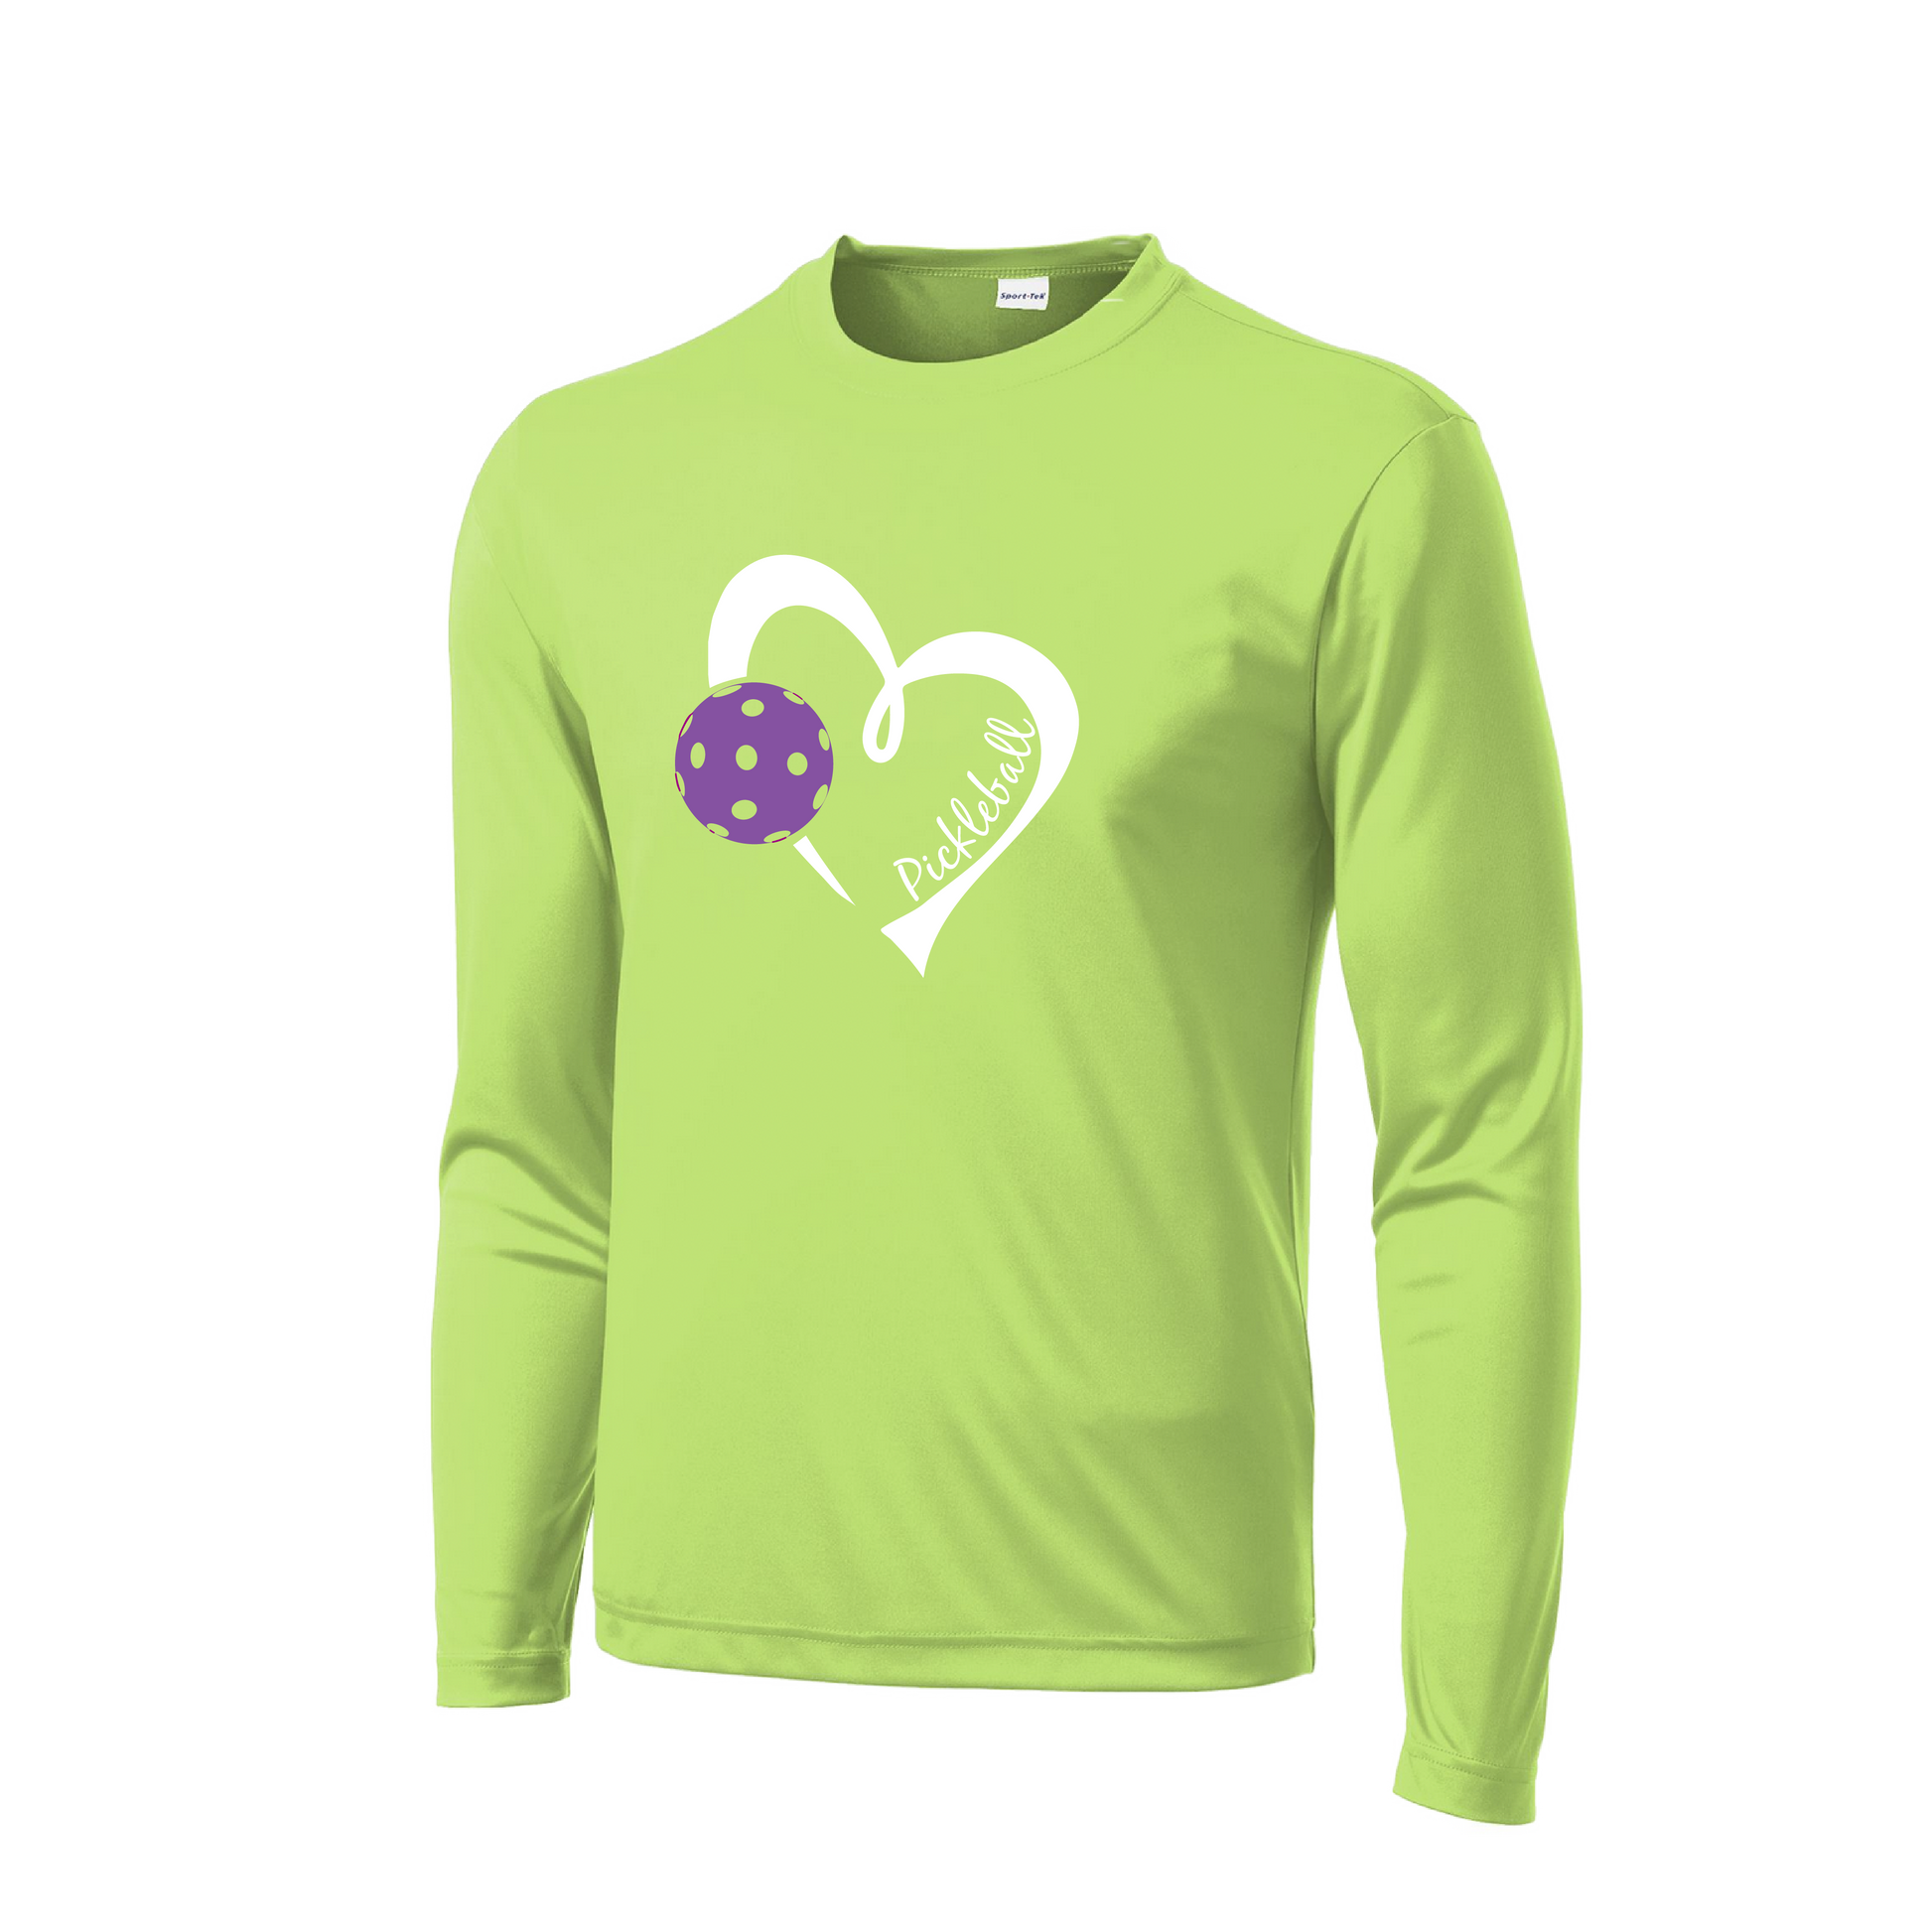 Comfortable and airy, these pickleball shirts were made for peak performance! High-quality PosiCharge tech preserves color and prevents logos from fading. Feel free in a lightweight, roomy design, with a removable tag and set-in sleeves for comfort.